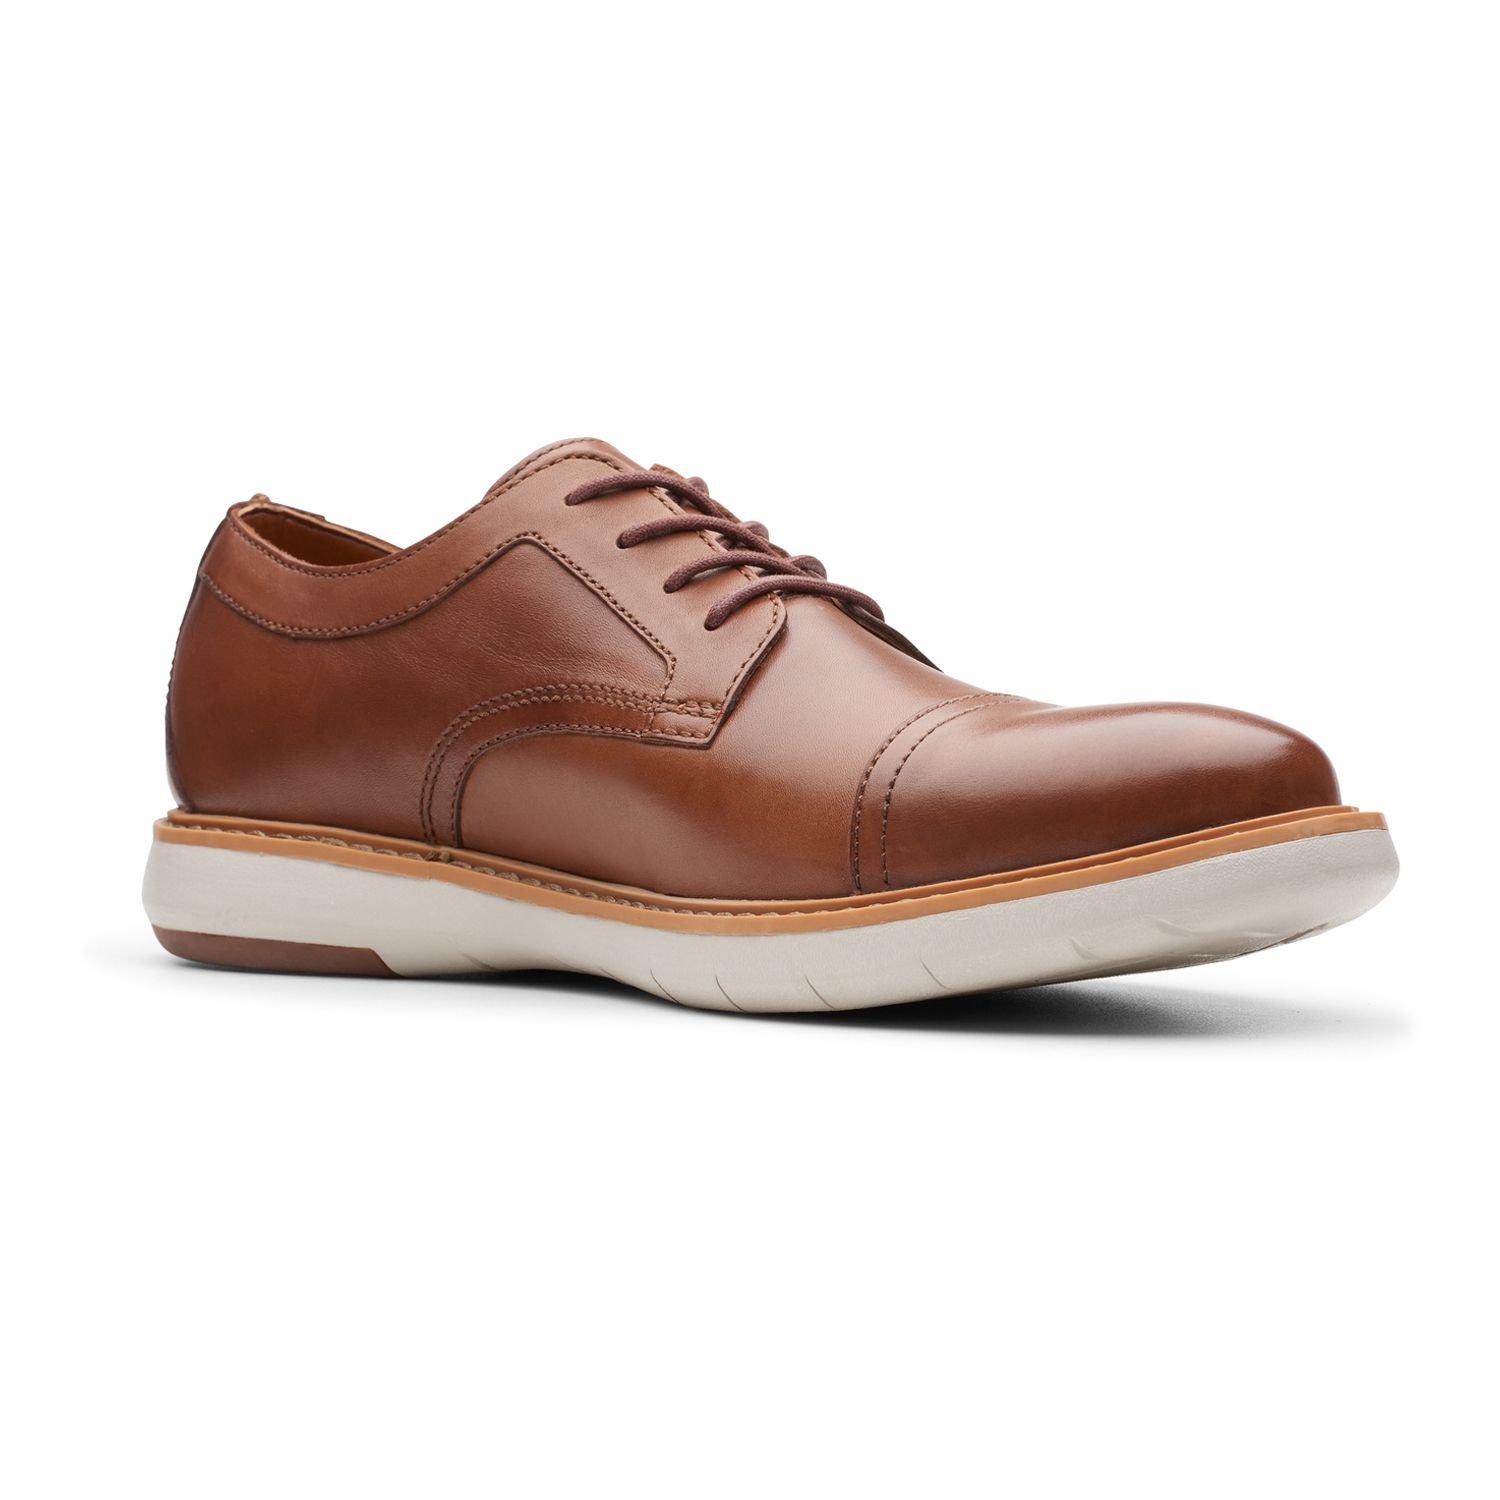 dockers men's parkview business casual oxford shoes